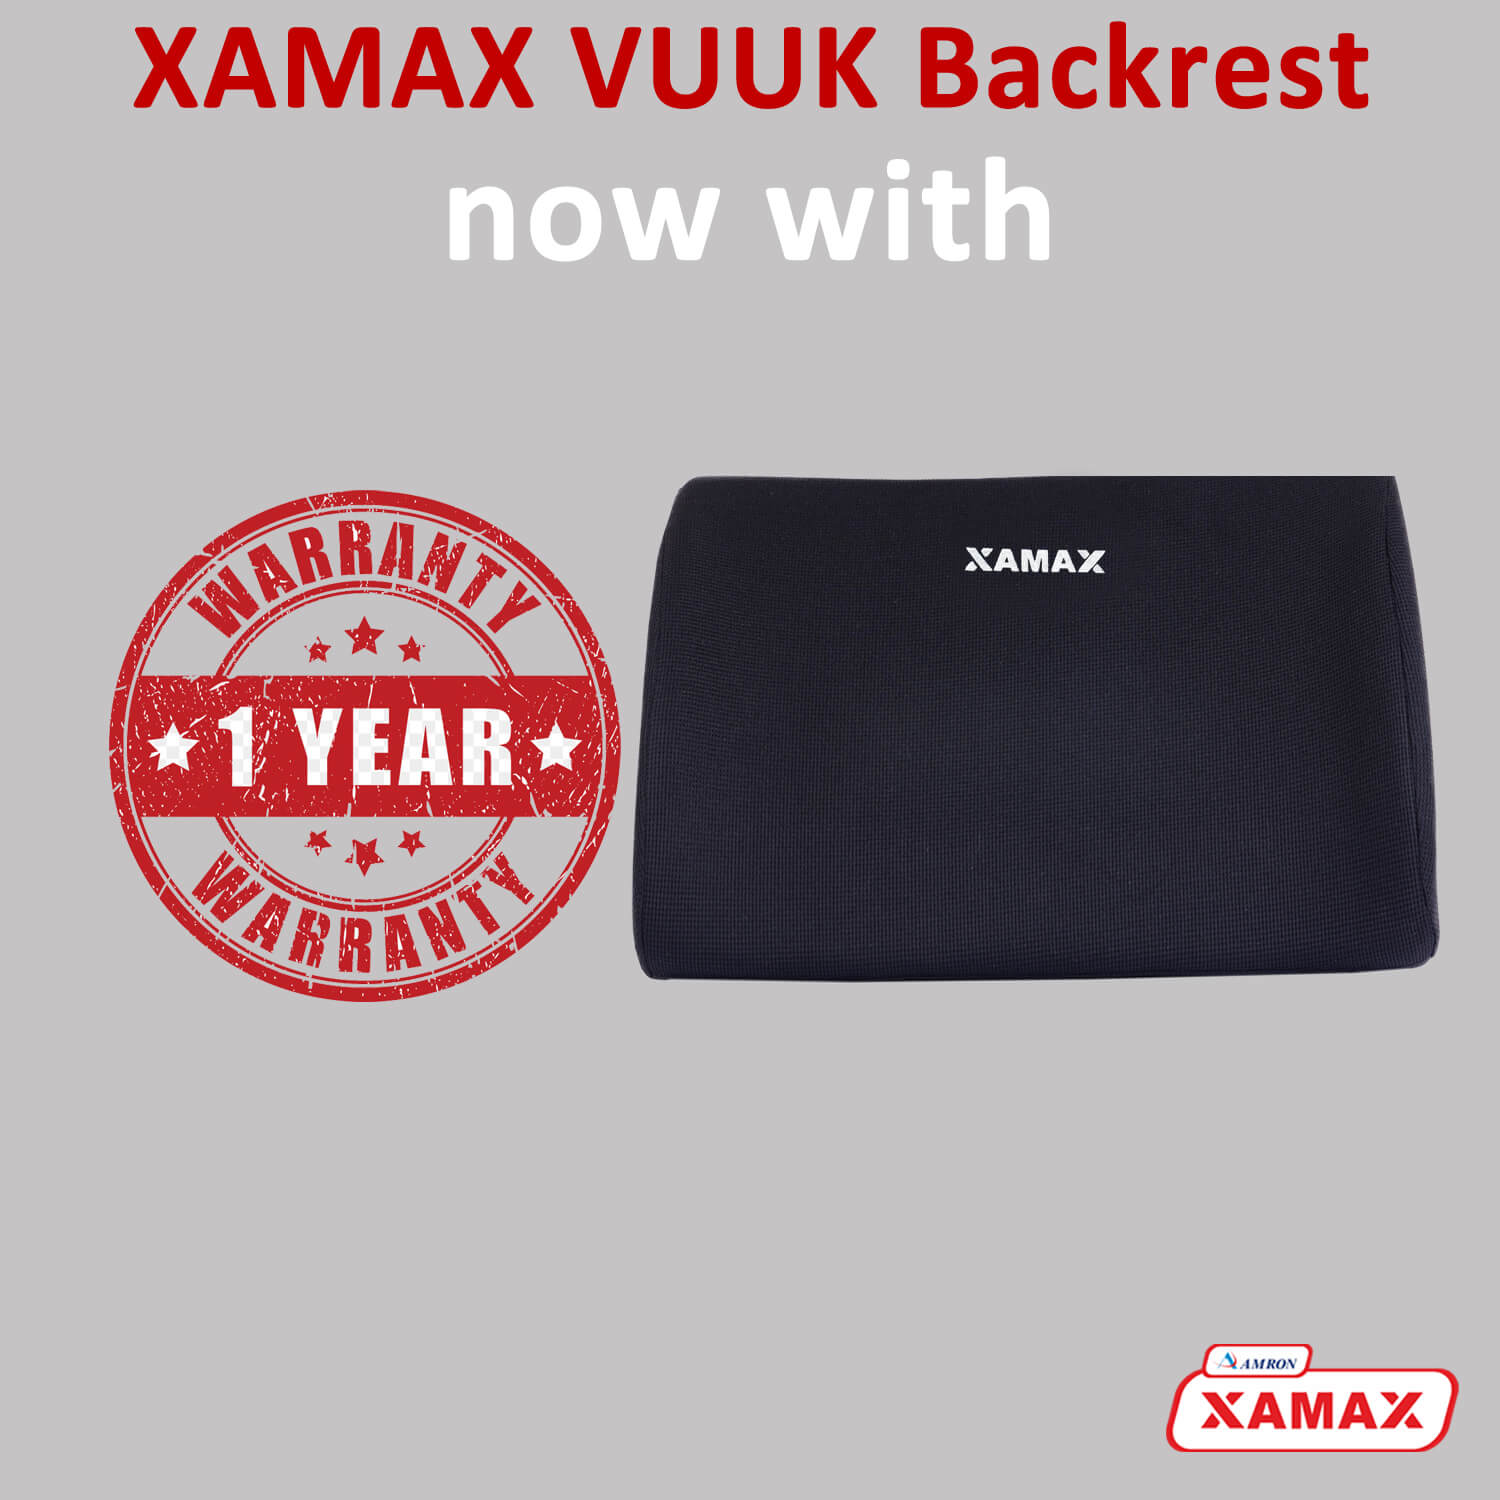 Xamax VUUK Backrest, For Bed, Sofa, And Couch.(Blue)